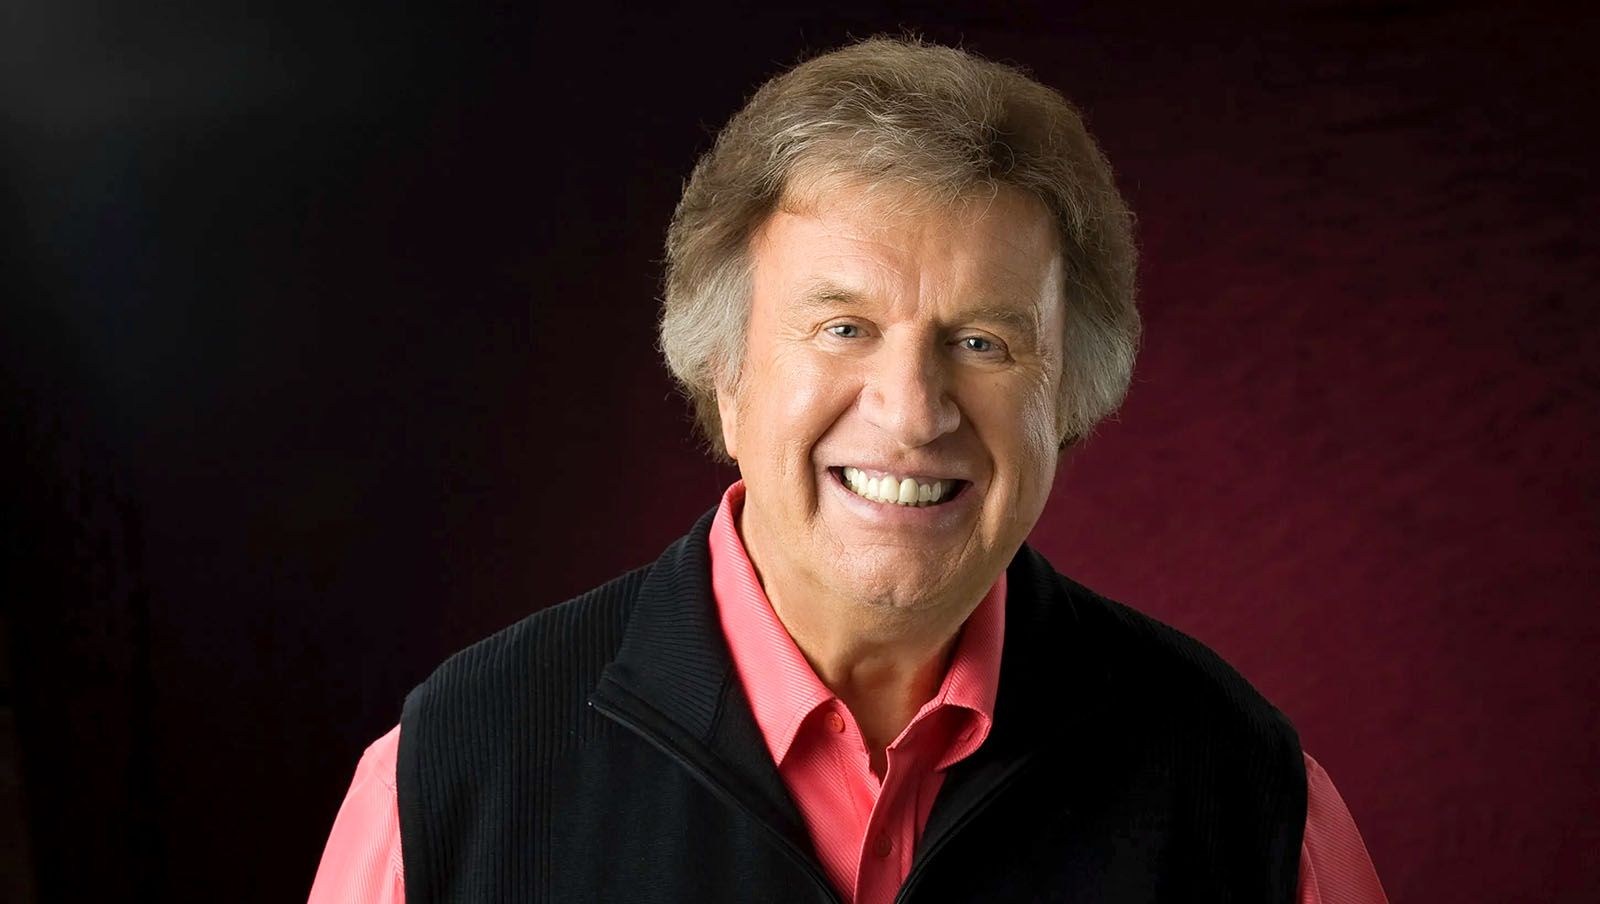 Bill Gaither and The Gaither Vocal Band will be at the Coliseum on Dec. 8.